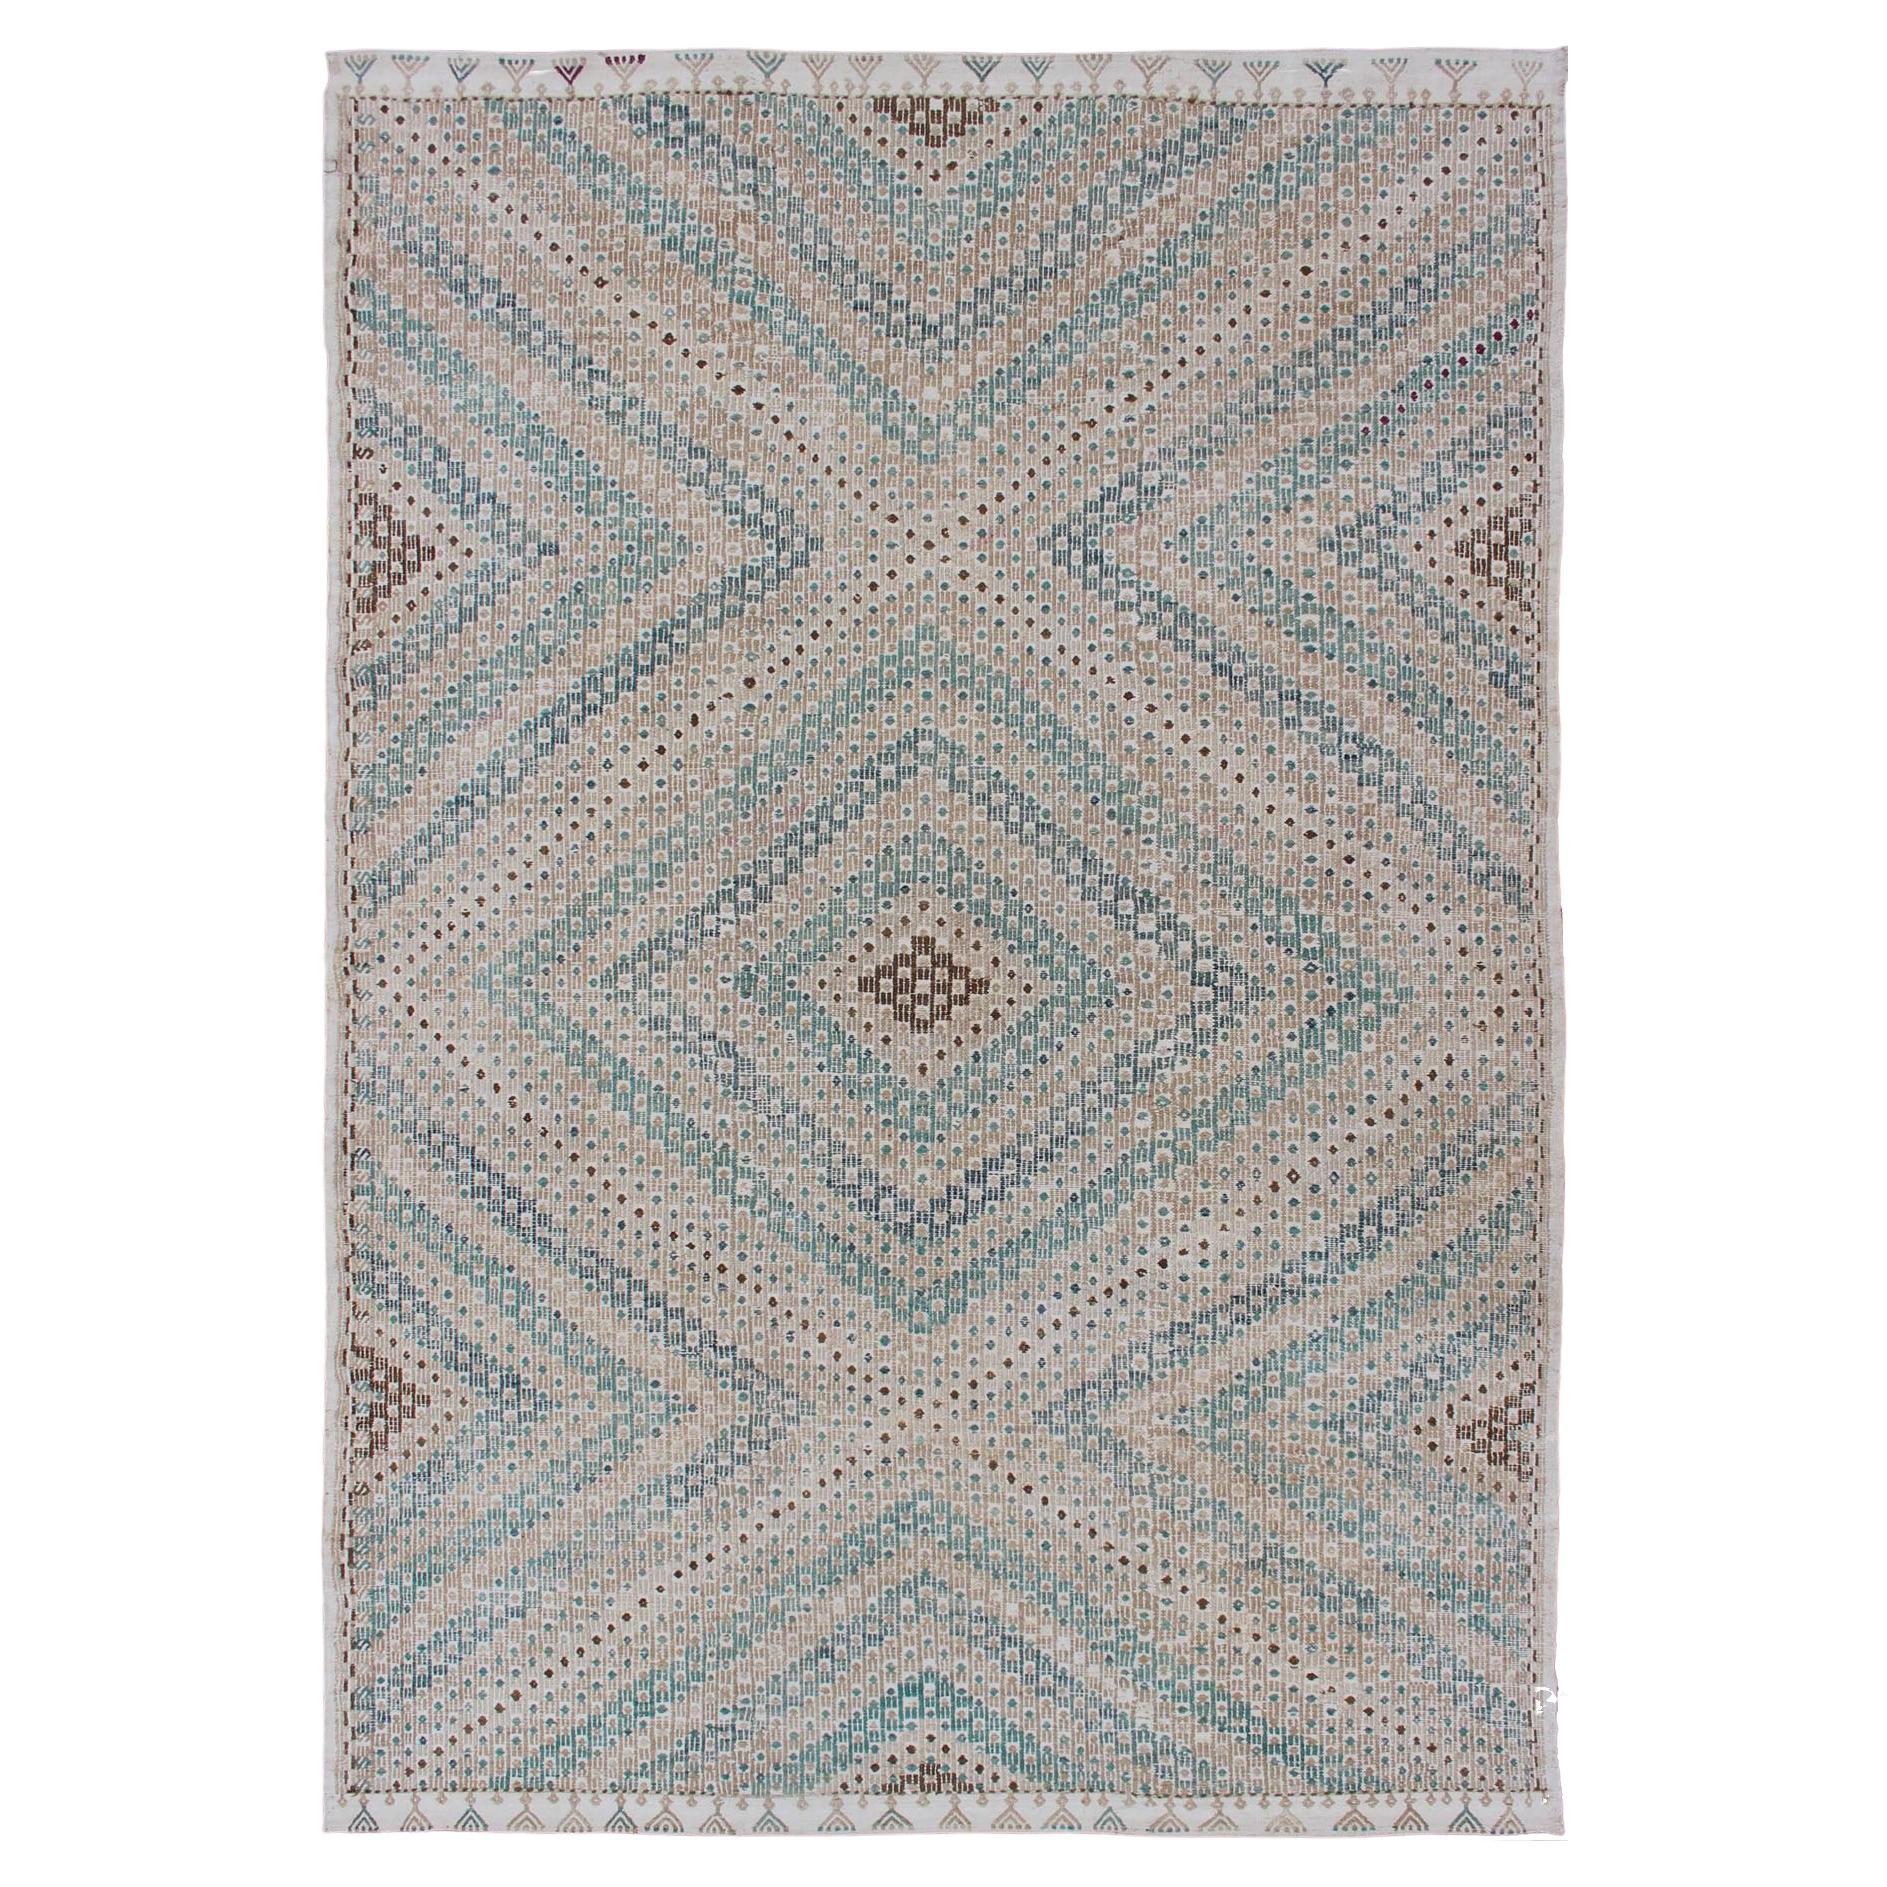 Diamond Design Vintage Turkish Embroidered Kilim in Tan, Blue, and Light Green For Sale